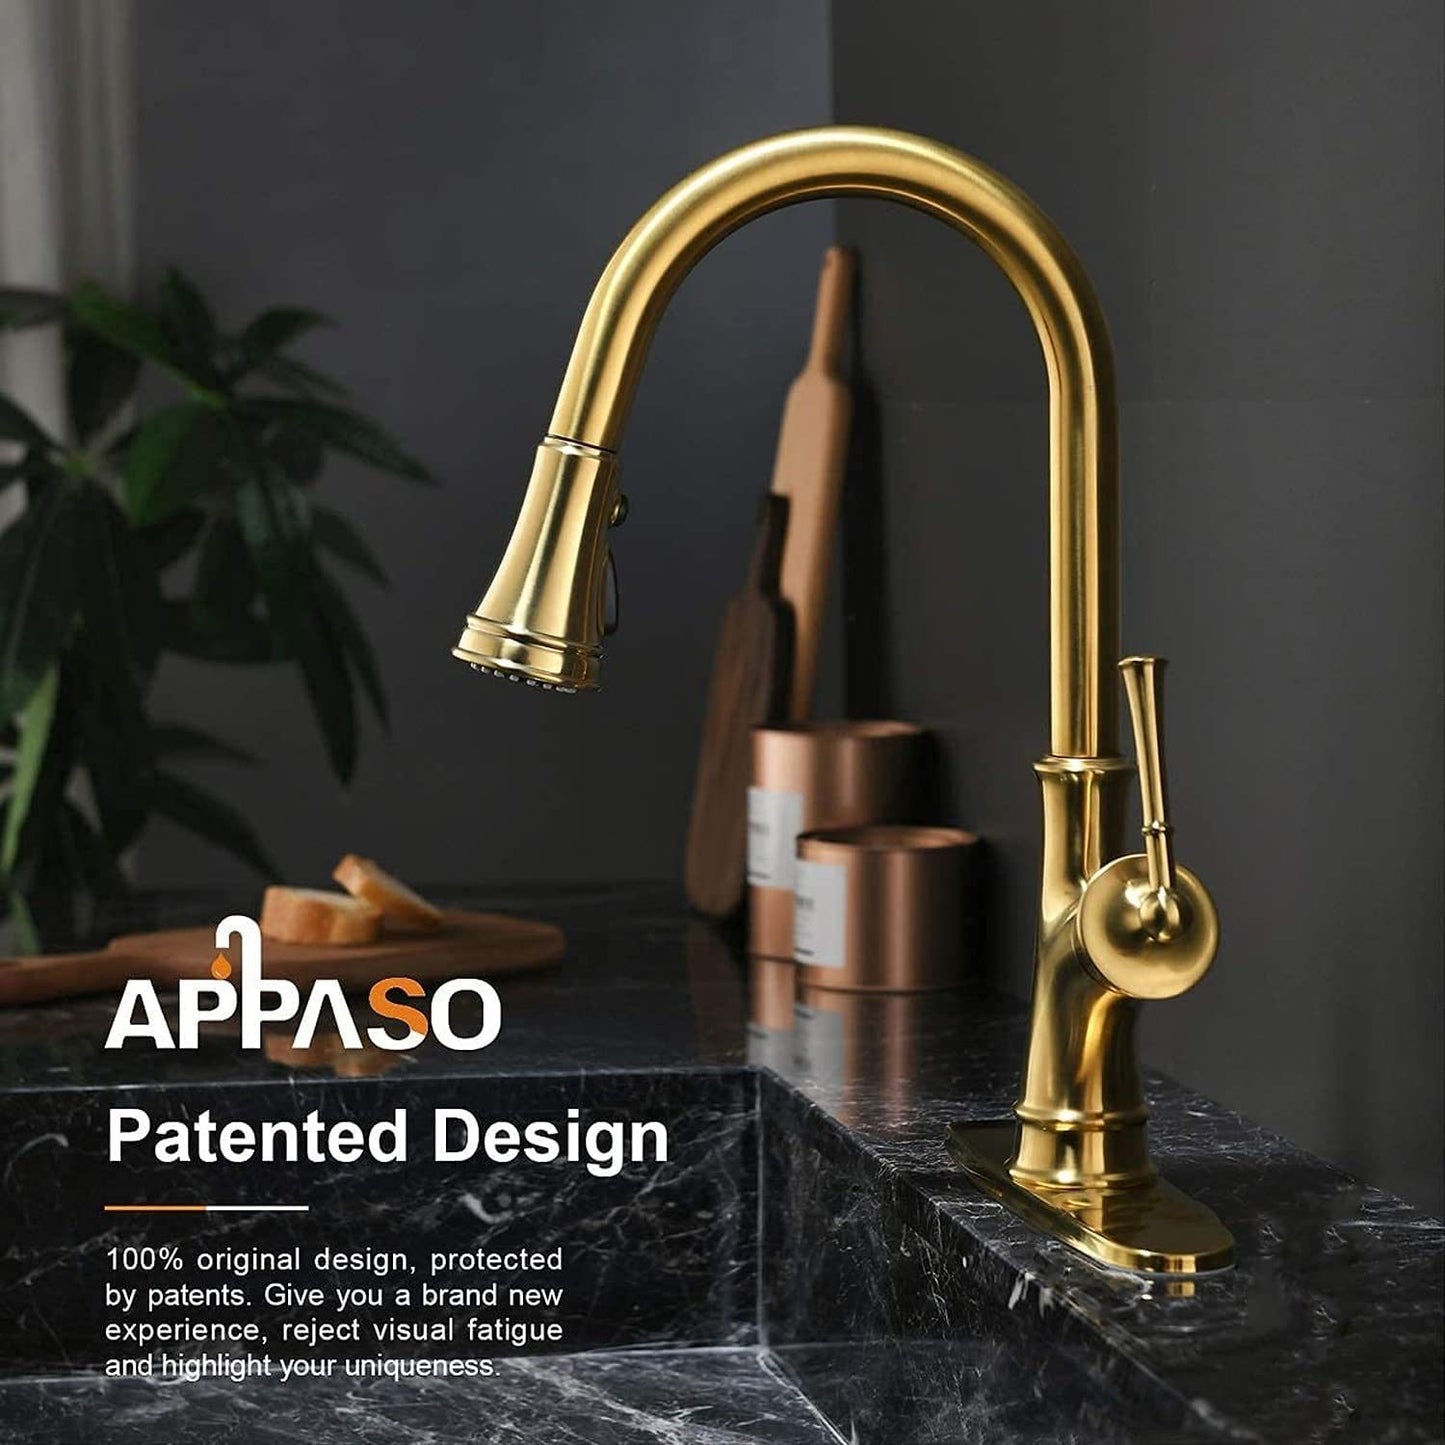 AvaMalis A|M Aquae APPASO Gold Kitchen Faucet with Pull Down Sprayer, Antique Brushed Gold Single Handle 1 Hole High Arc Copper Brass Pull Out Kitchen Sink Faucets, Champagne Gold